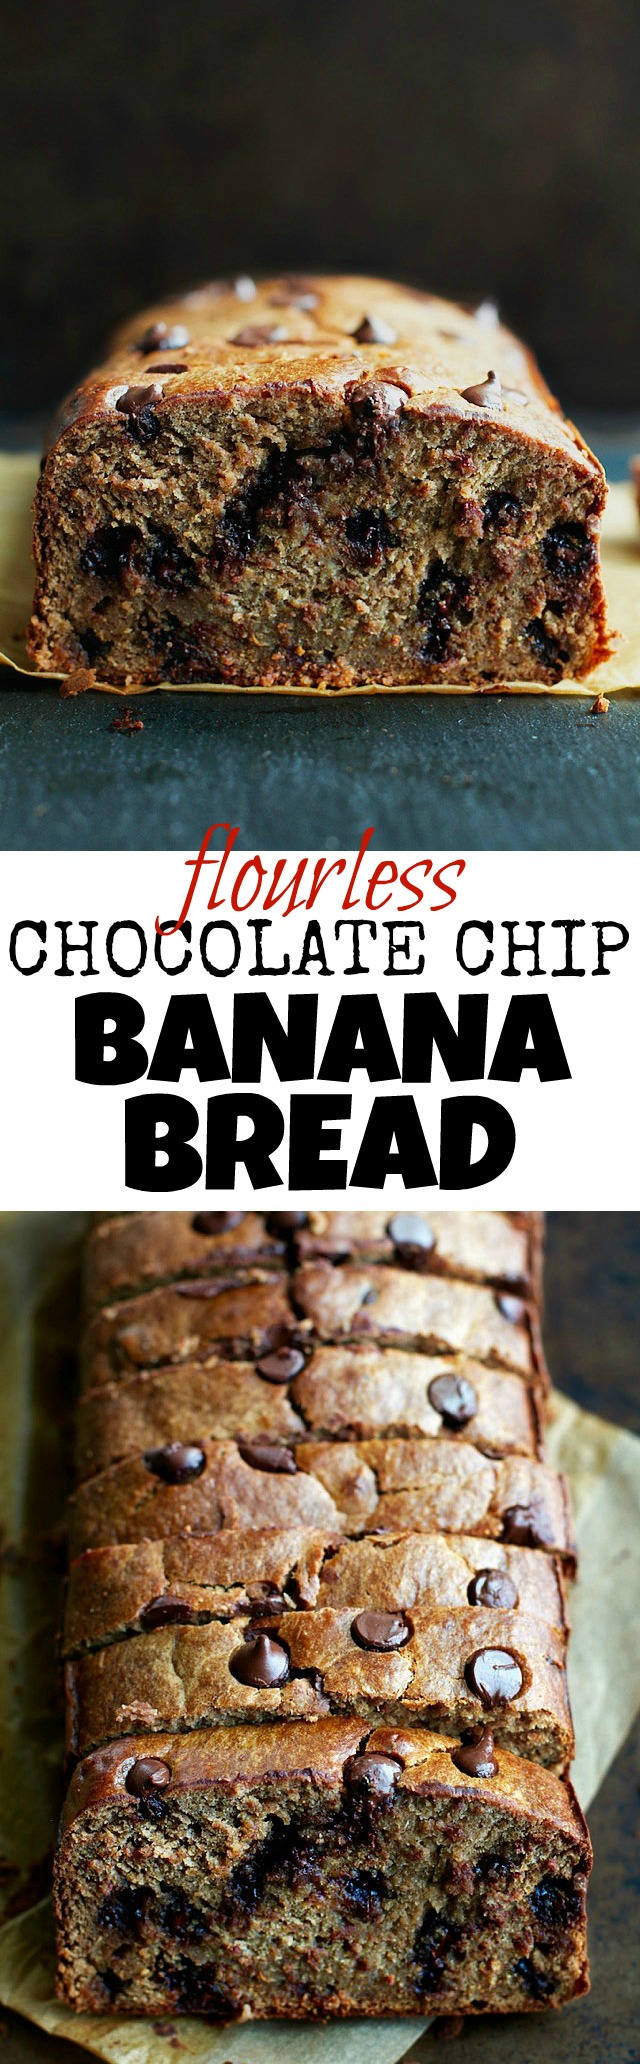 This Flourless Chocolate Chip Banana Bread is made with NO flour, butter, or oil, but so soft, tender, and flavourful that you'd never be able to tell! | runningwithspoons.com